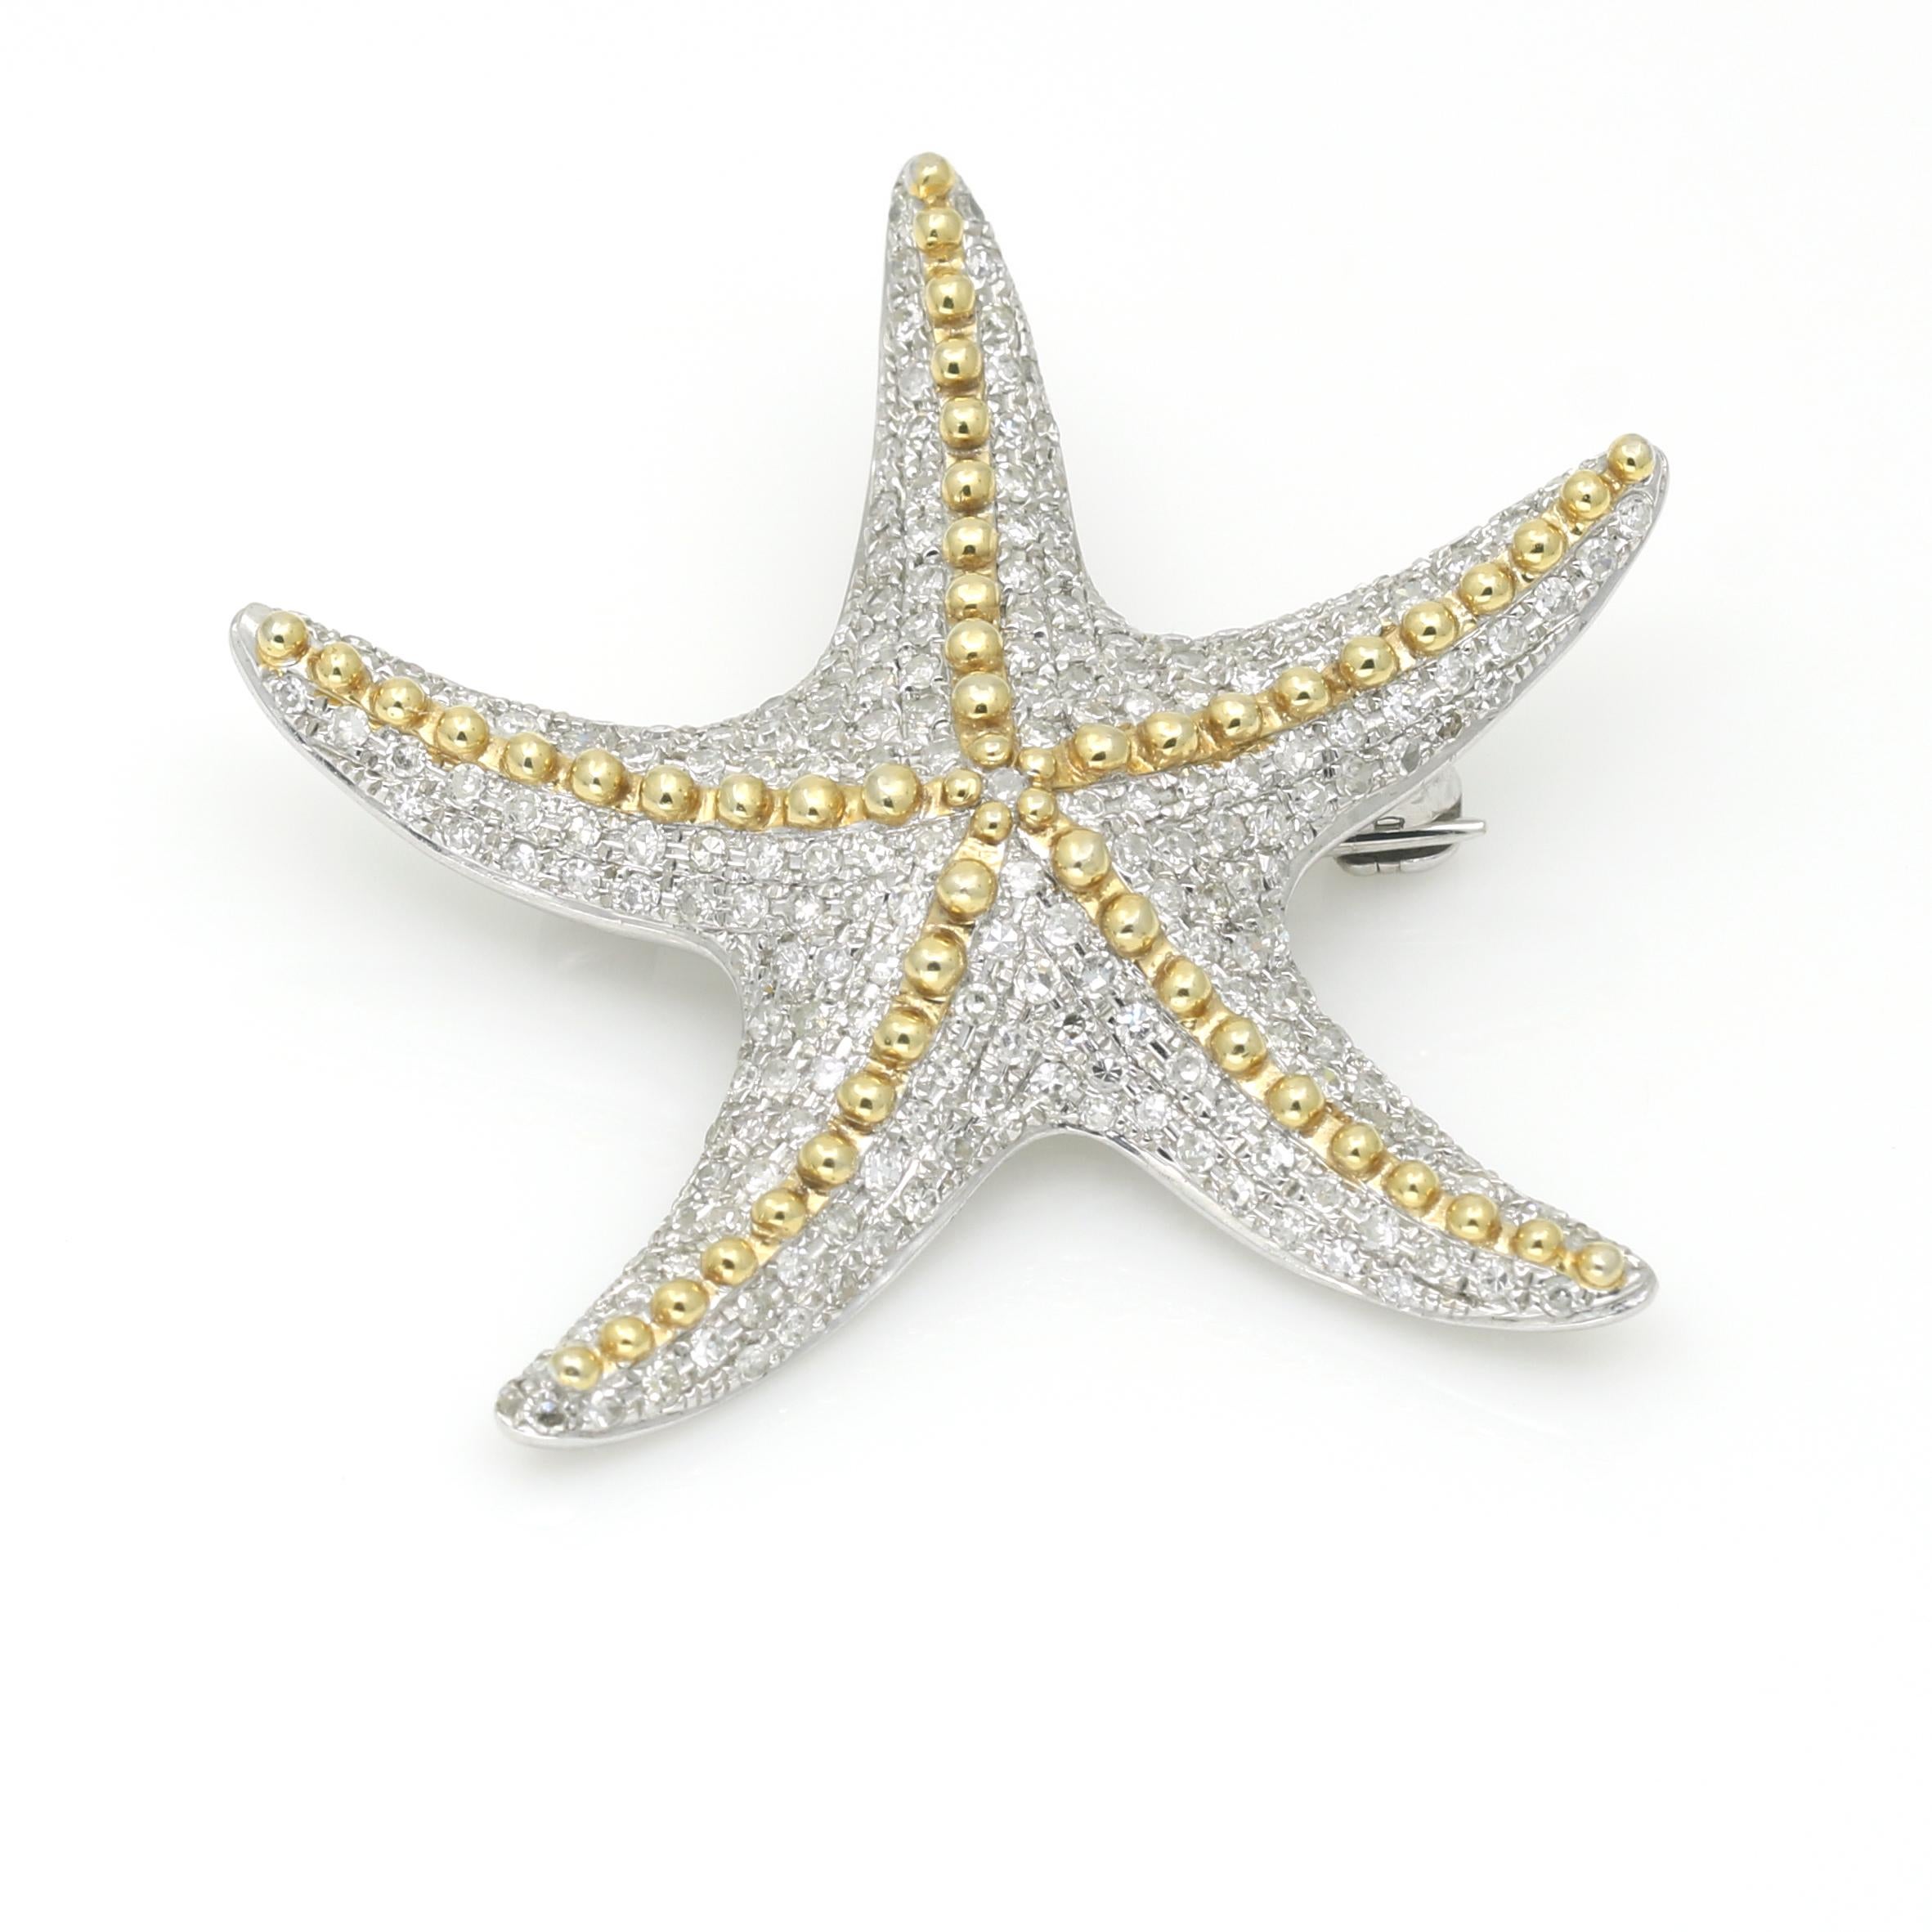 Immerse yourself in the allure of the Pave Diamond Starfish Brooch Pendant, a mesmerizing creation handcrafted in the harmonious 14k yellow and white gold blend. This exquisite piece showcases a starfish design adorned with glistening pave diamonds,